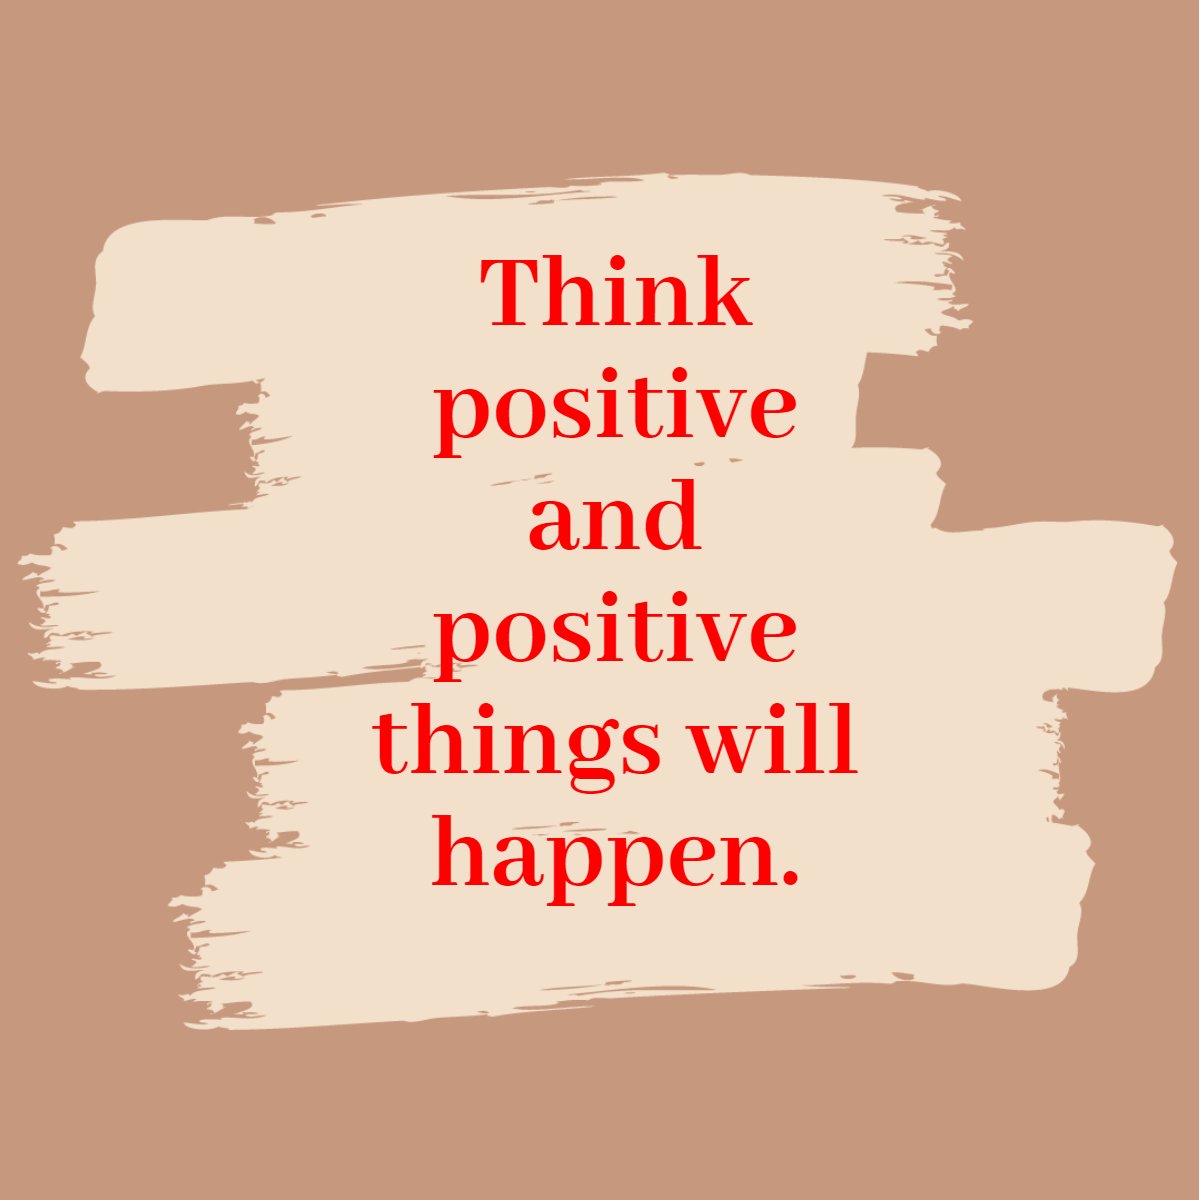 'When you think positive, good things happen.'
― Matt Kemp 

#positivethoughts  #positivethoughtsonly  #lawofpositivism  #positivism  #positiveaffirmationsthoughts